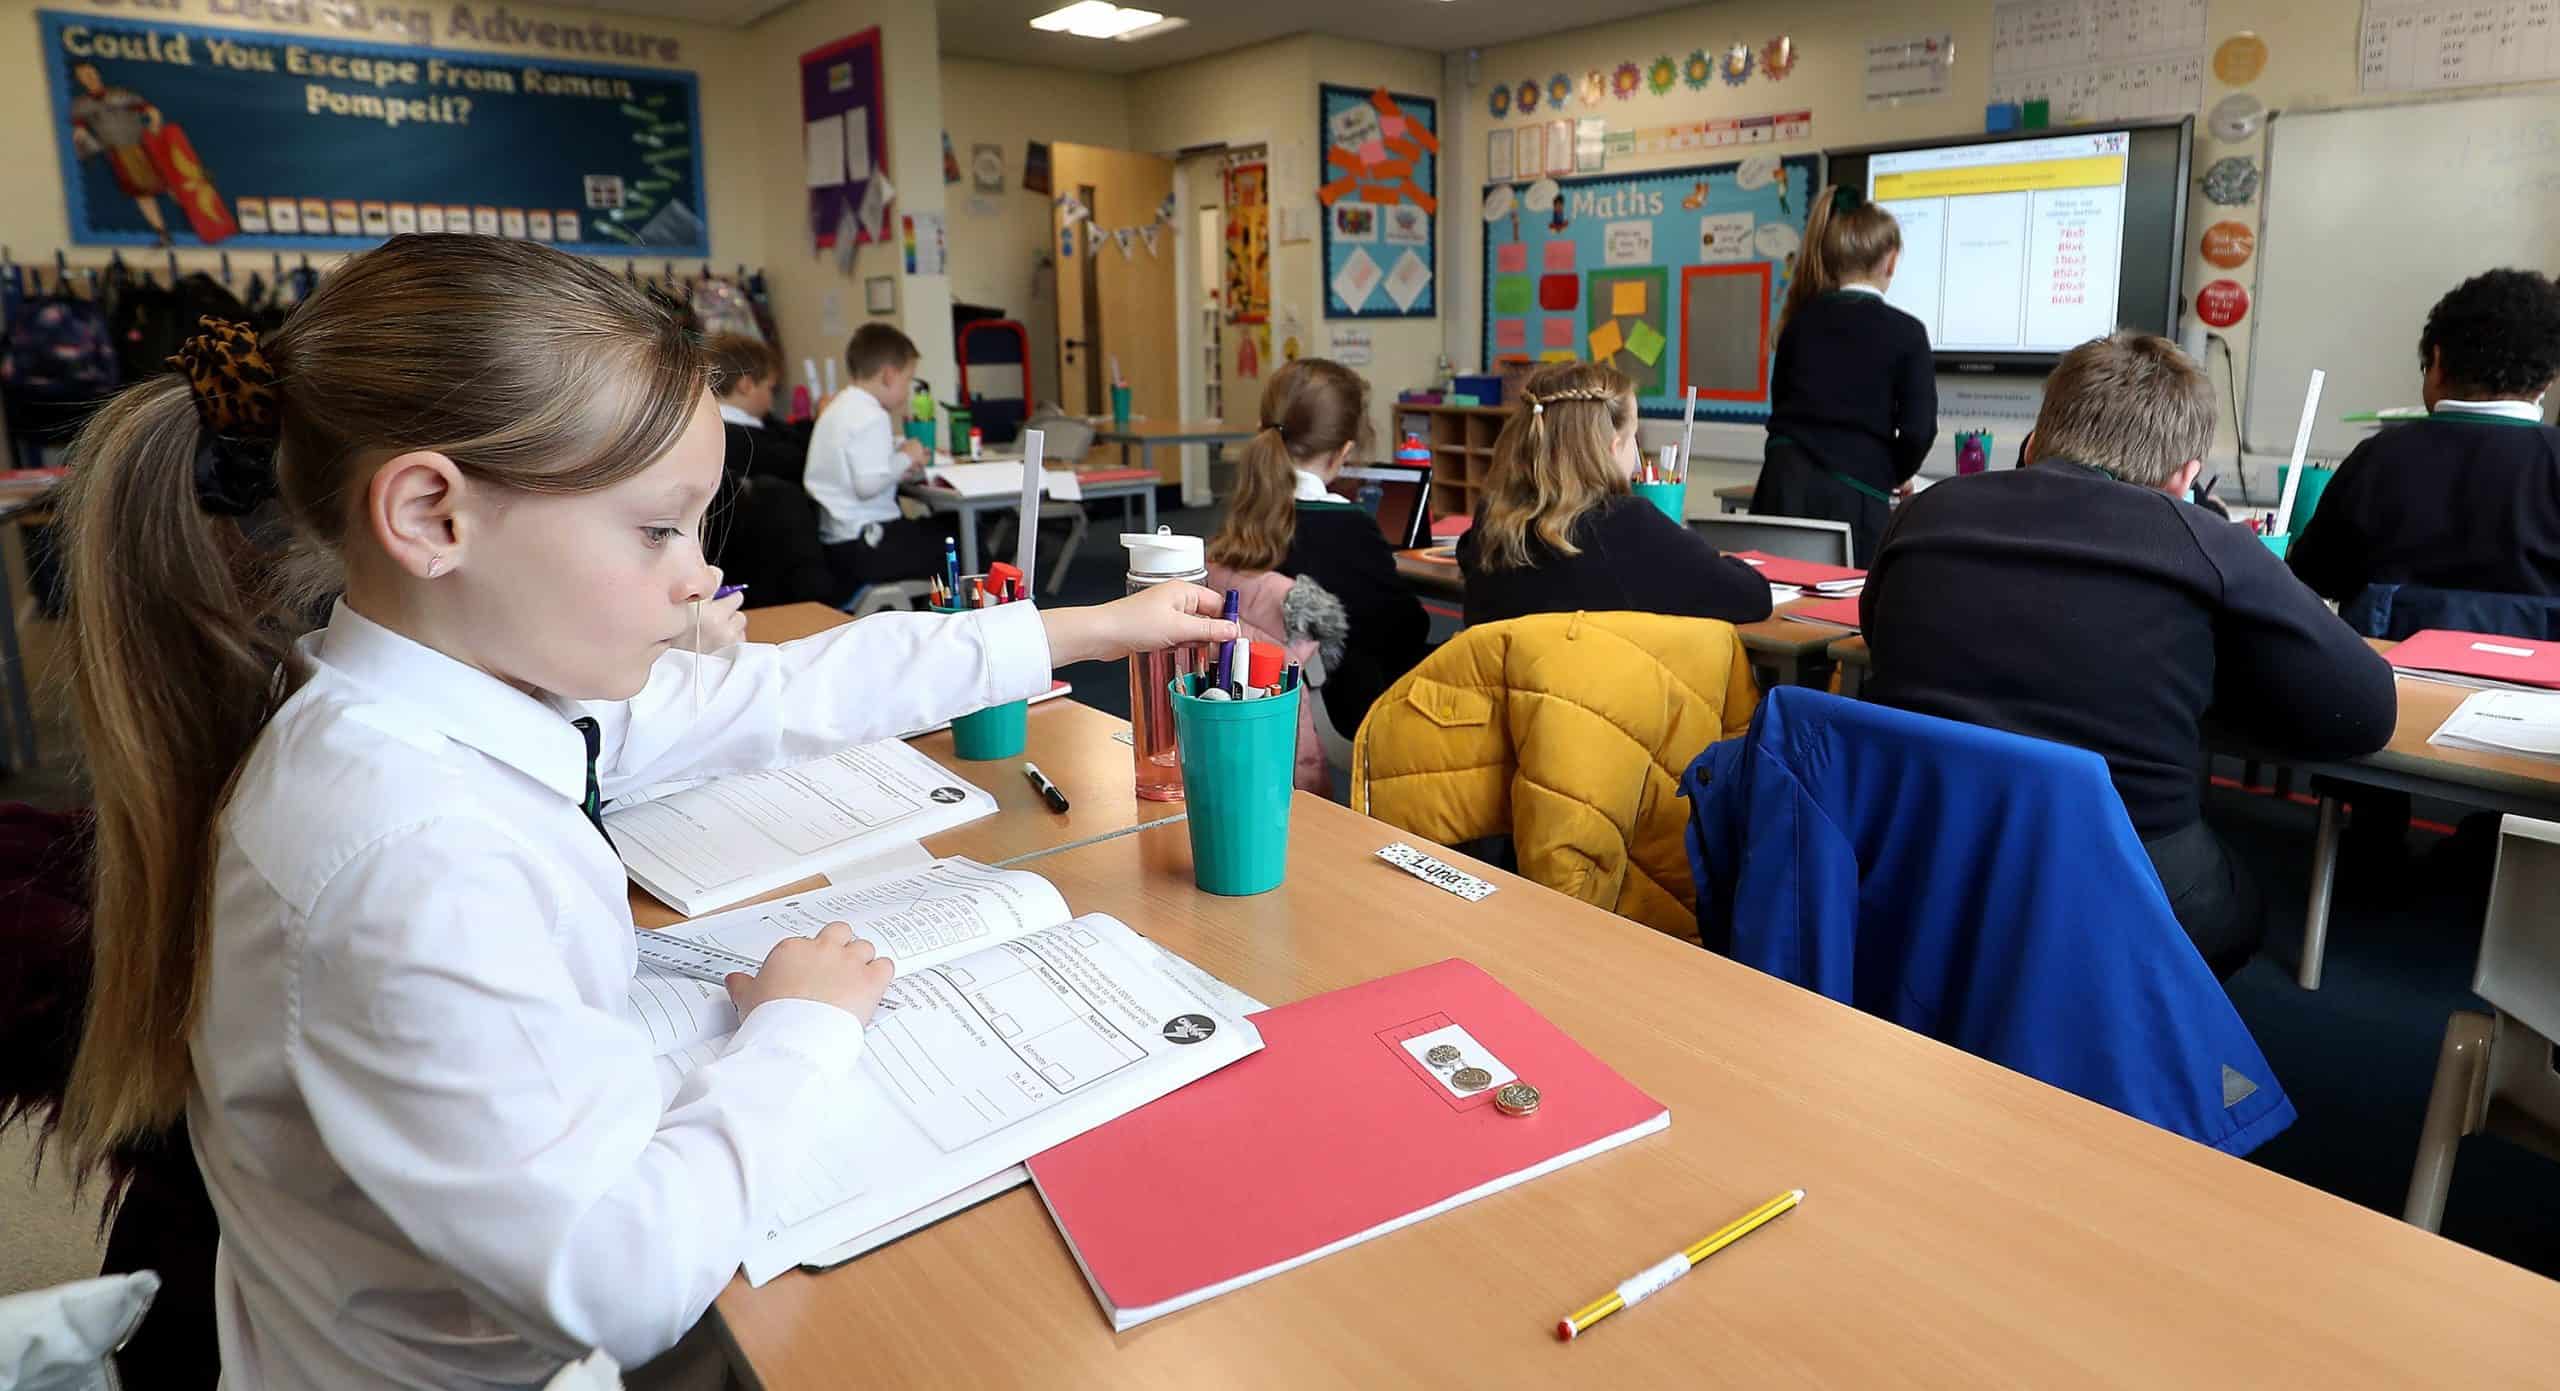 Girls do like hard maths, says Children’s Commissioner in apparent criticism of another Government tsar’s previous comments